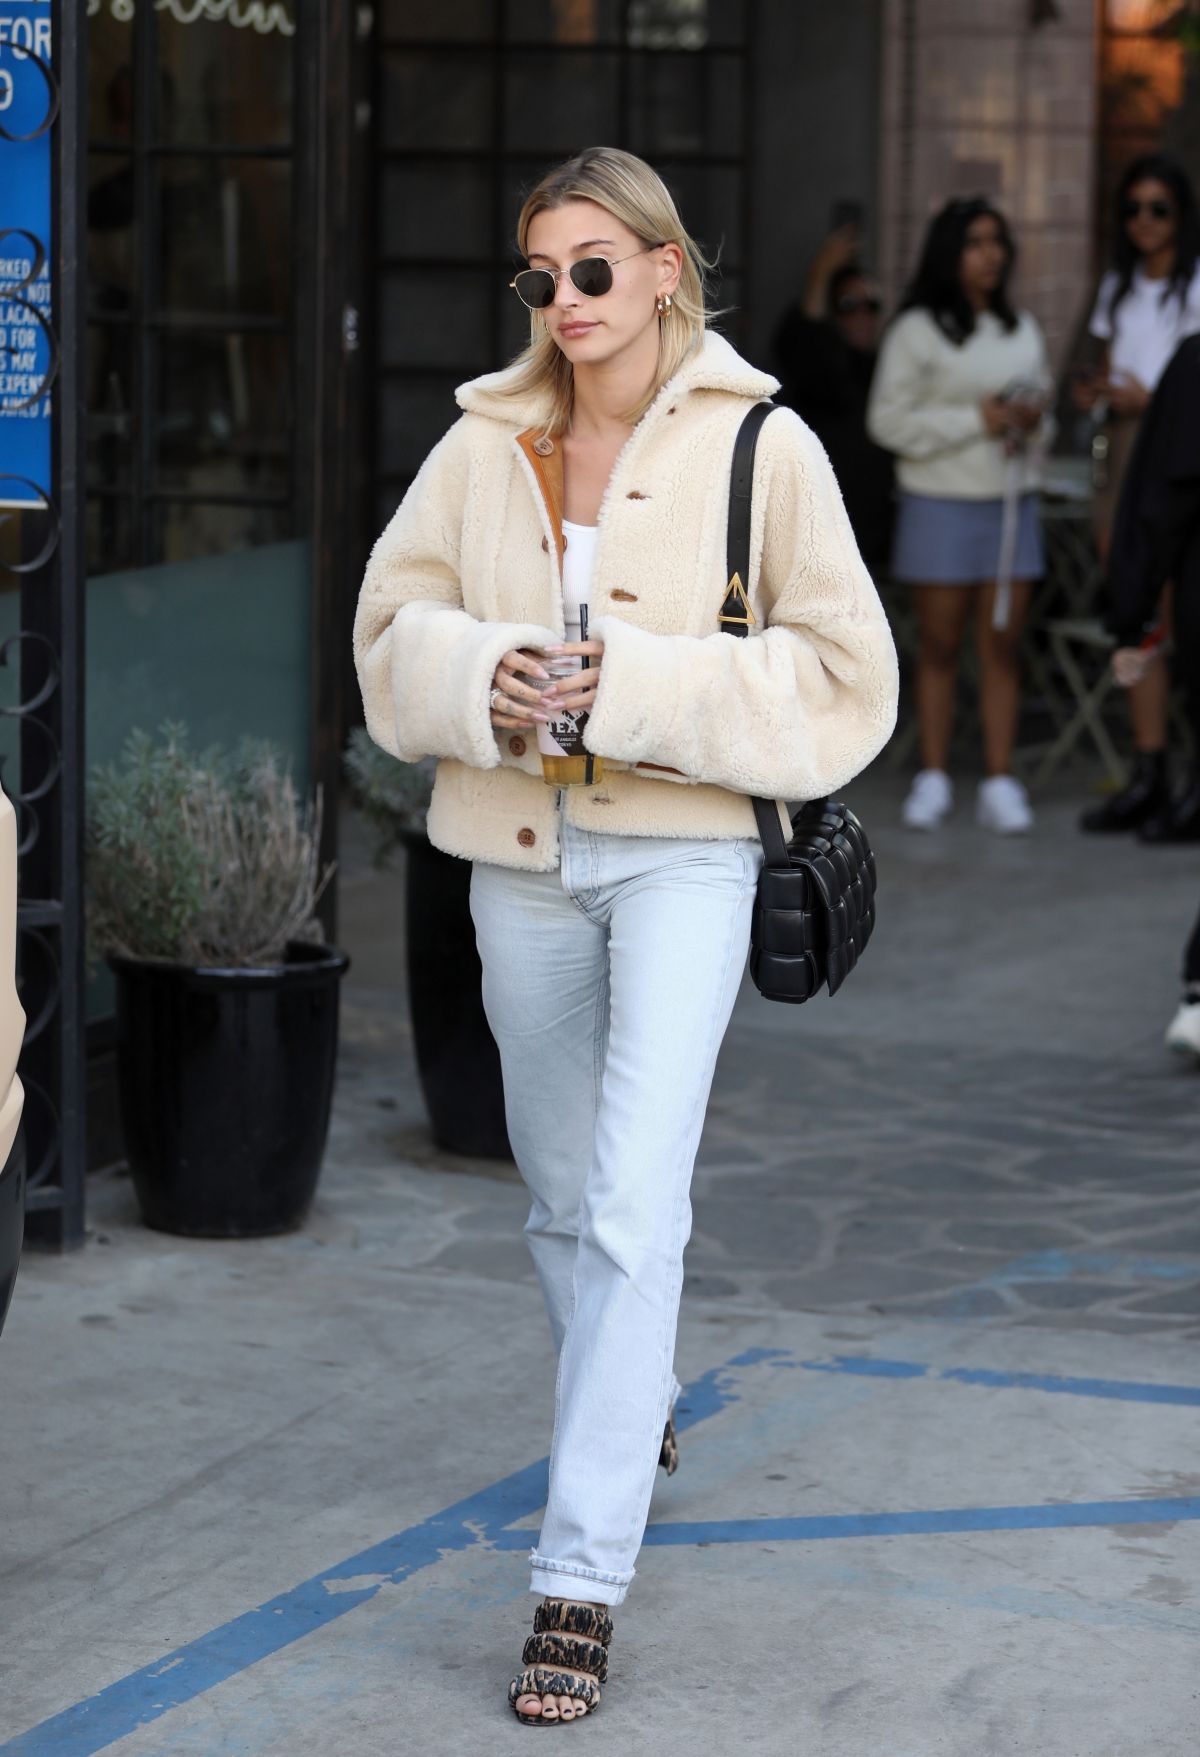 hailey bieber rocks louis vuitton fanny pack as she arrives at nine zero  one hair salon in west hollywood, los angeles-151019_4